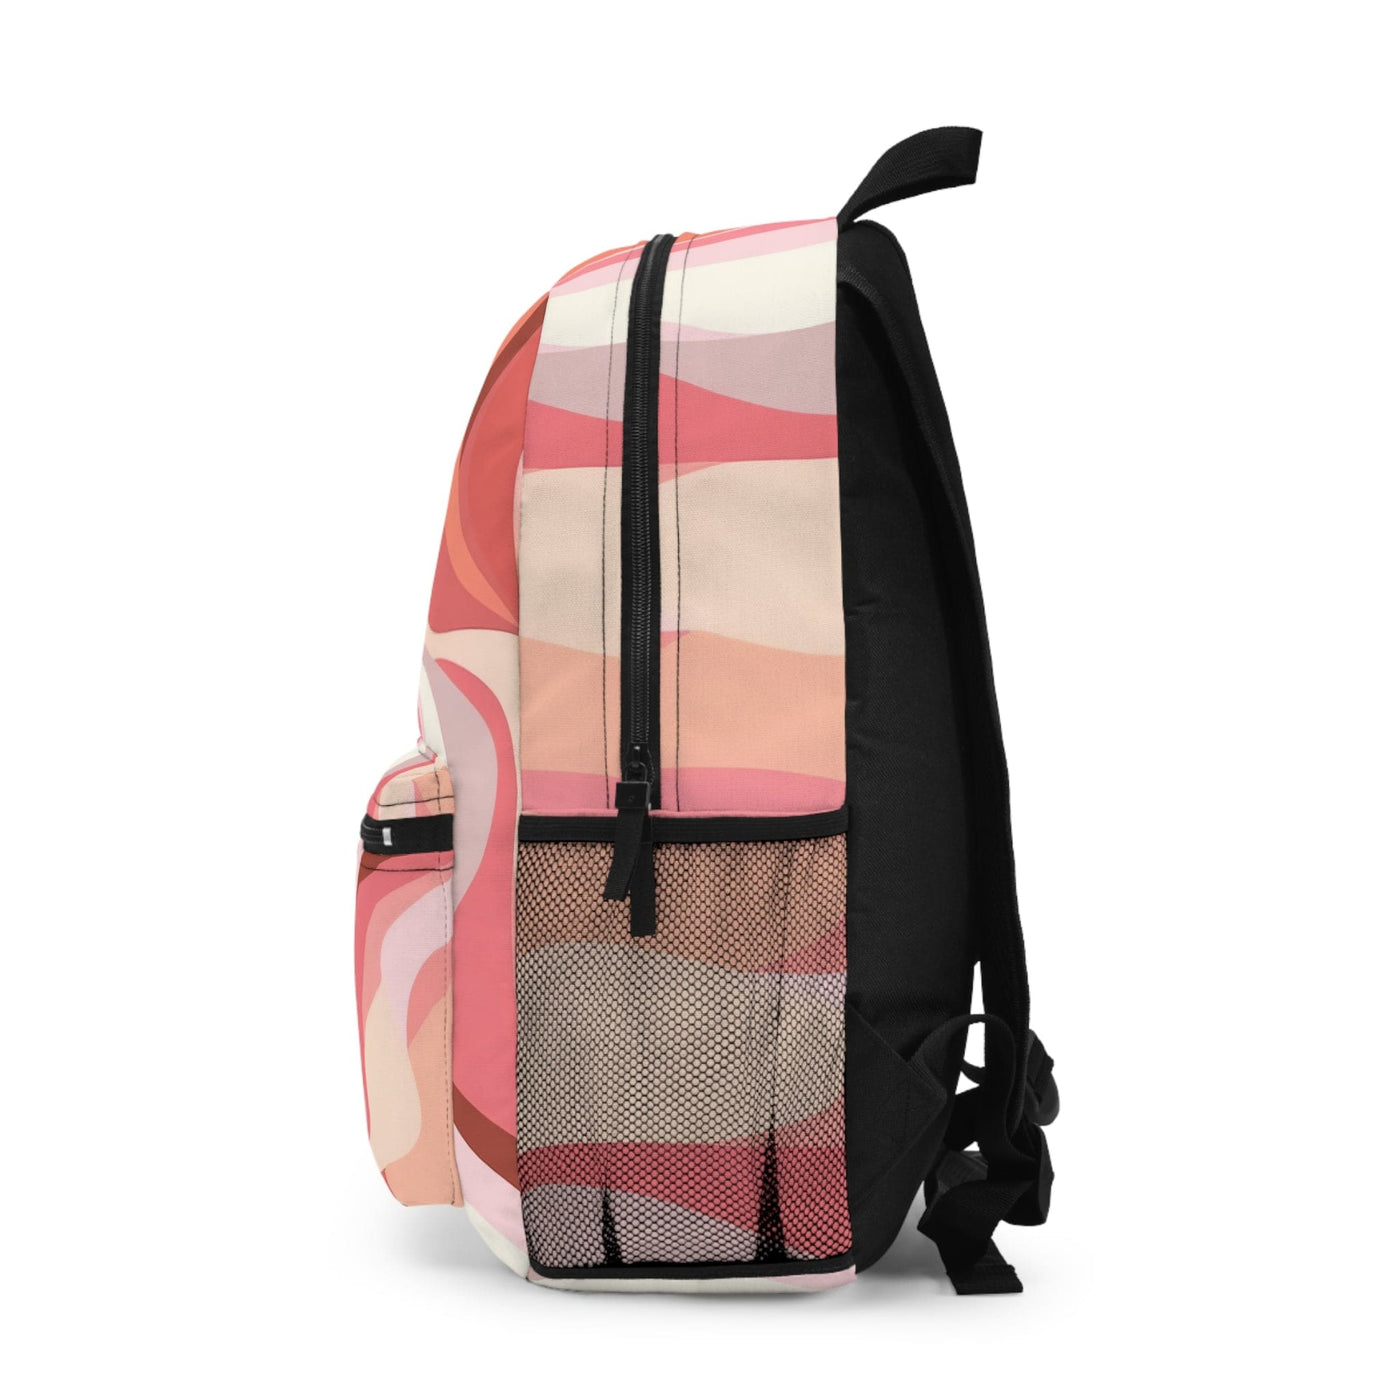 Backpack Work/school/leisure - Waterproof Boho Pink And White Contemporary Art